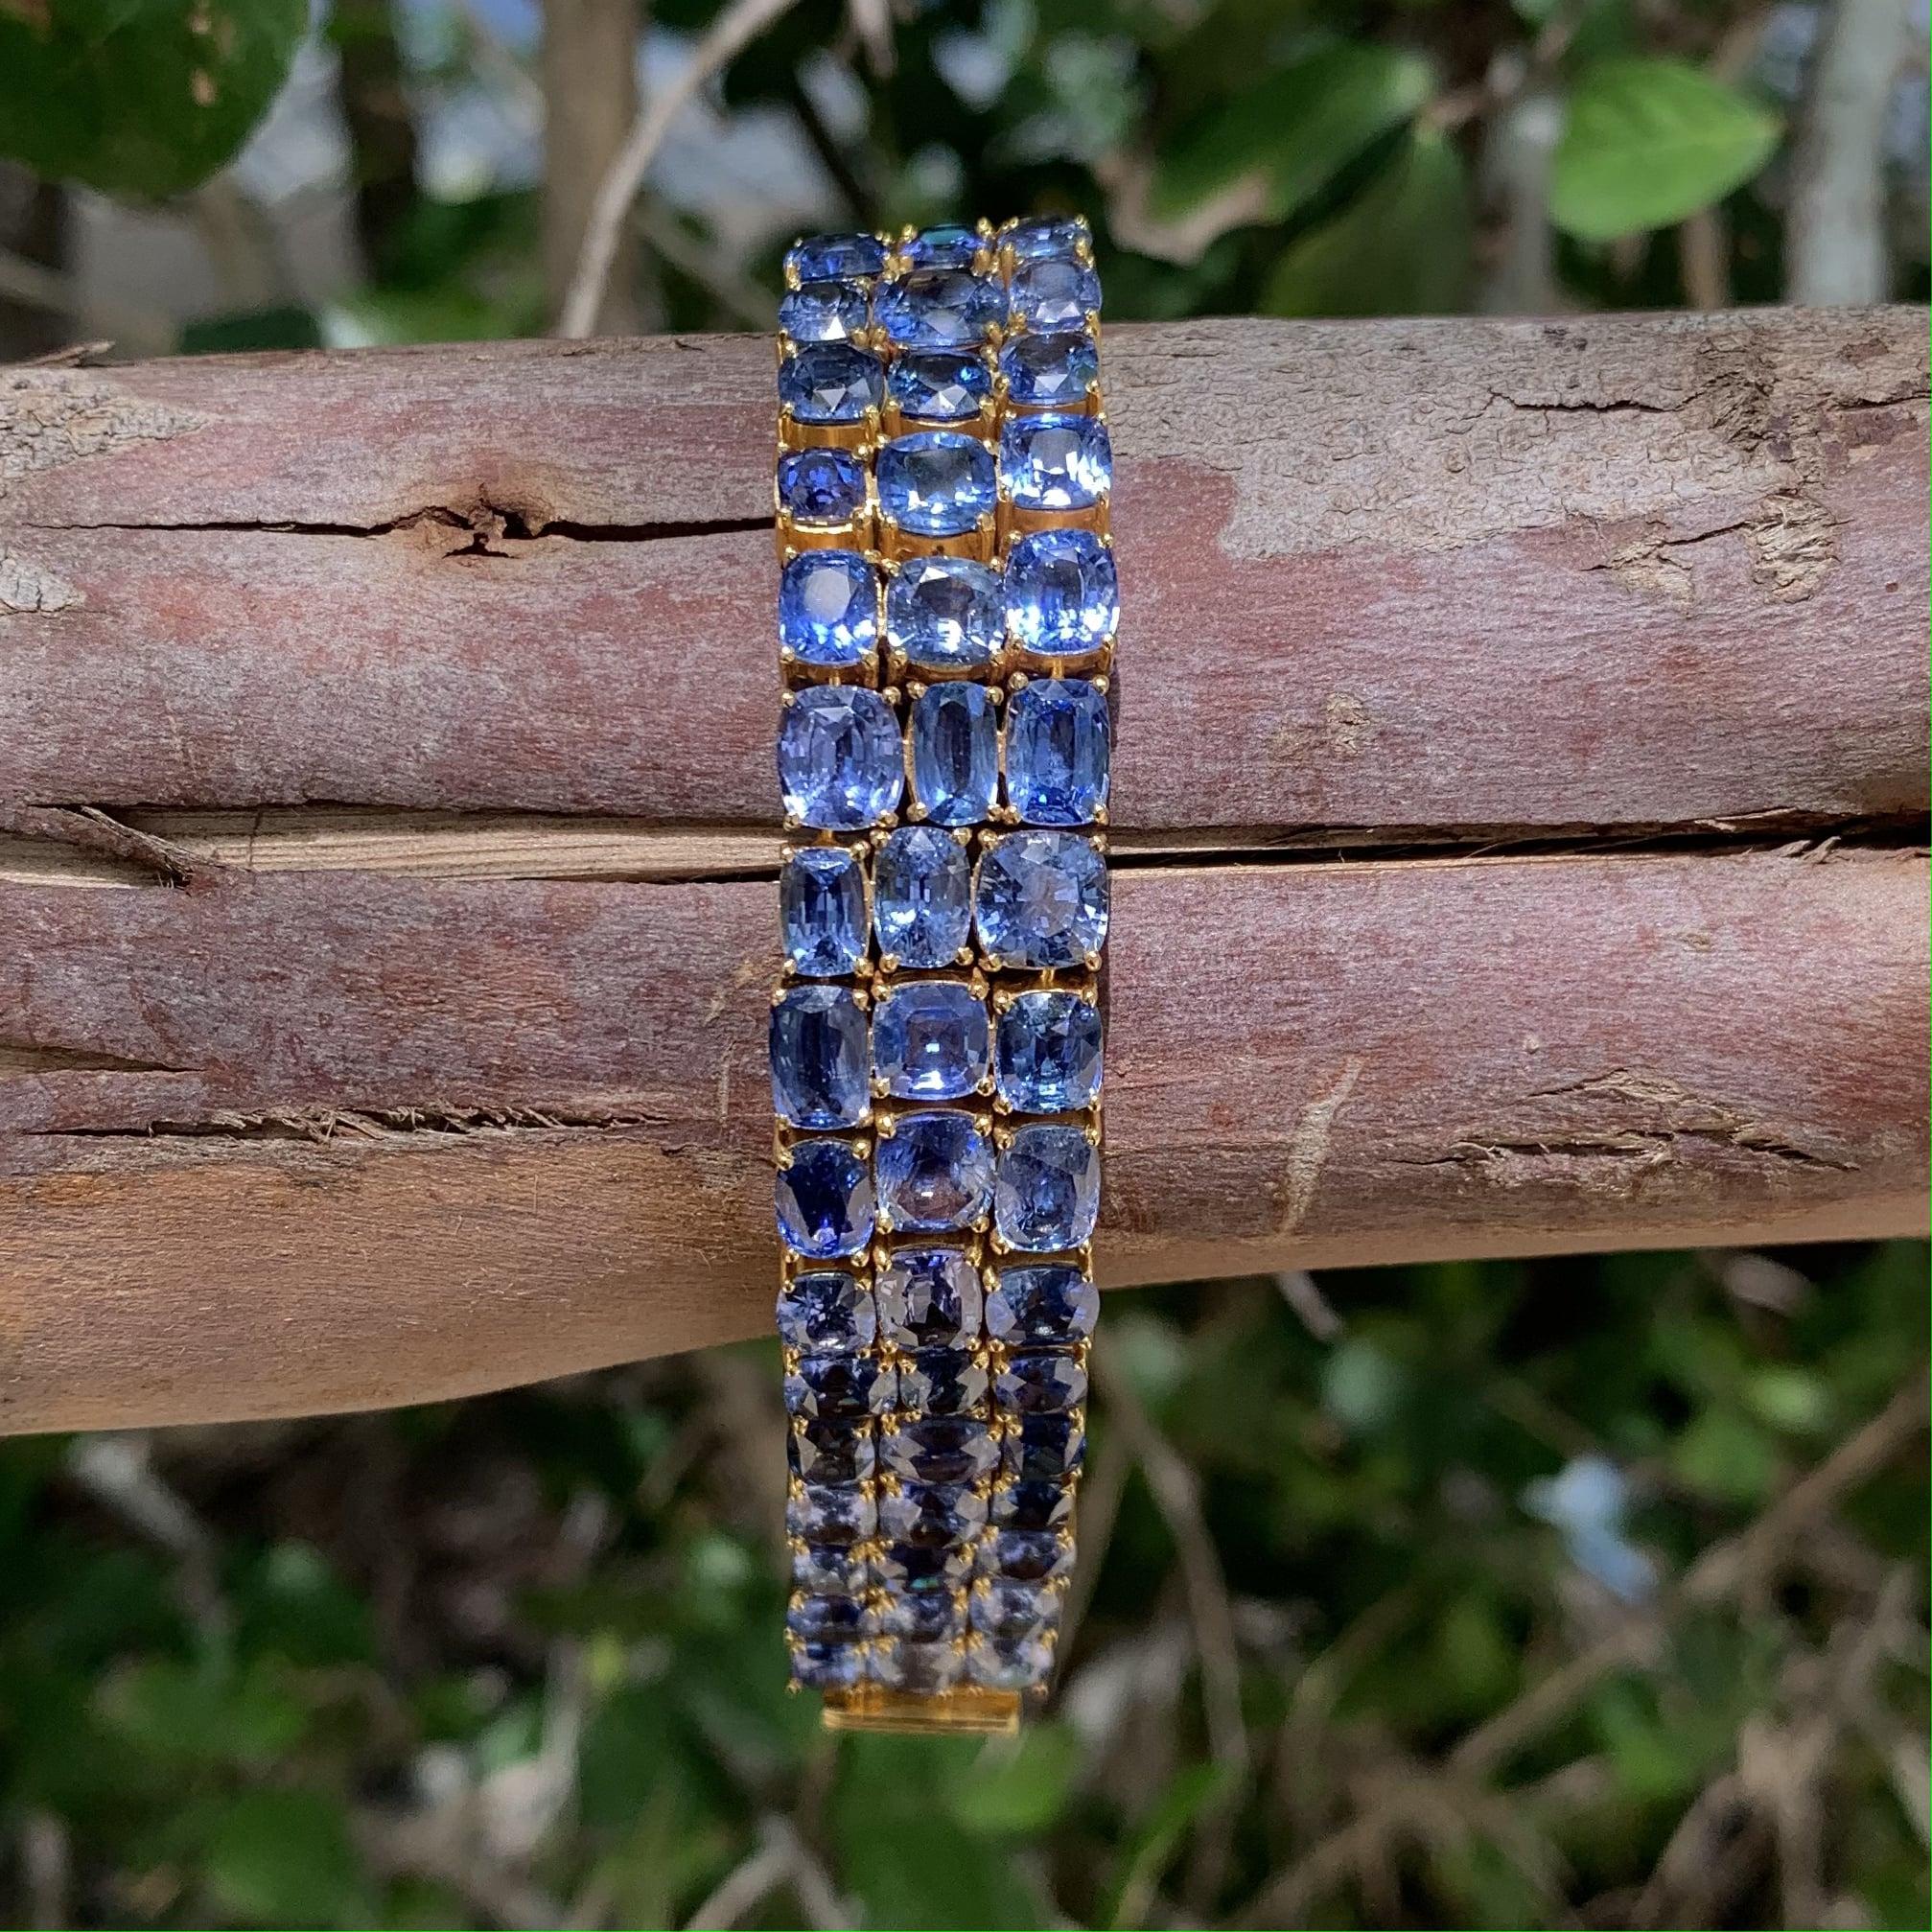 Presenting one of our most extraordinary and majestic creations, a one-of-a-kind Sapphire studded bracelet that is truly unparalleled in its uniqueness and rarity. Specially handcrafted with meticulous attention to detail, this bracelet is a true